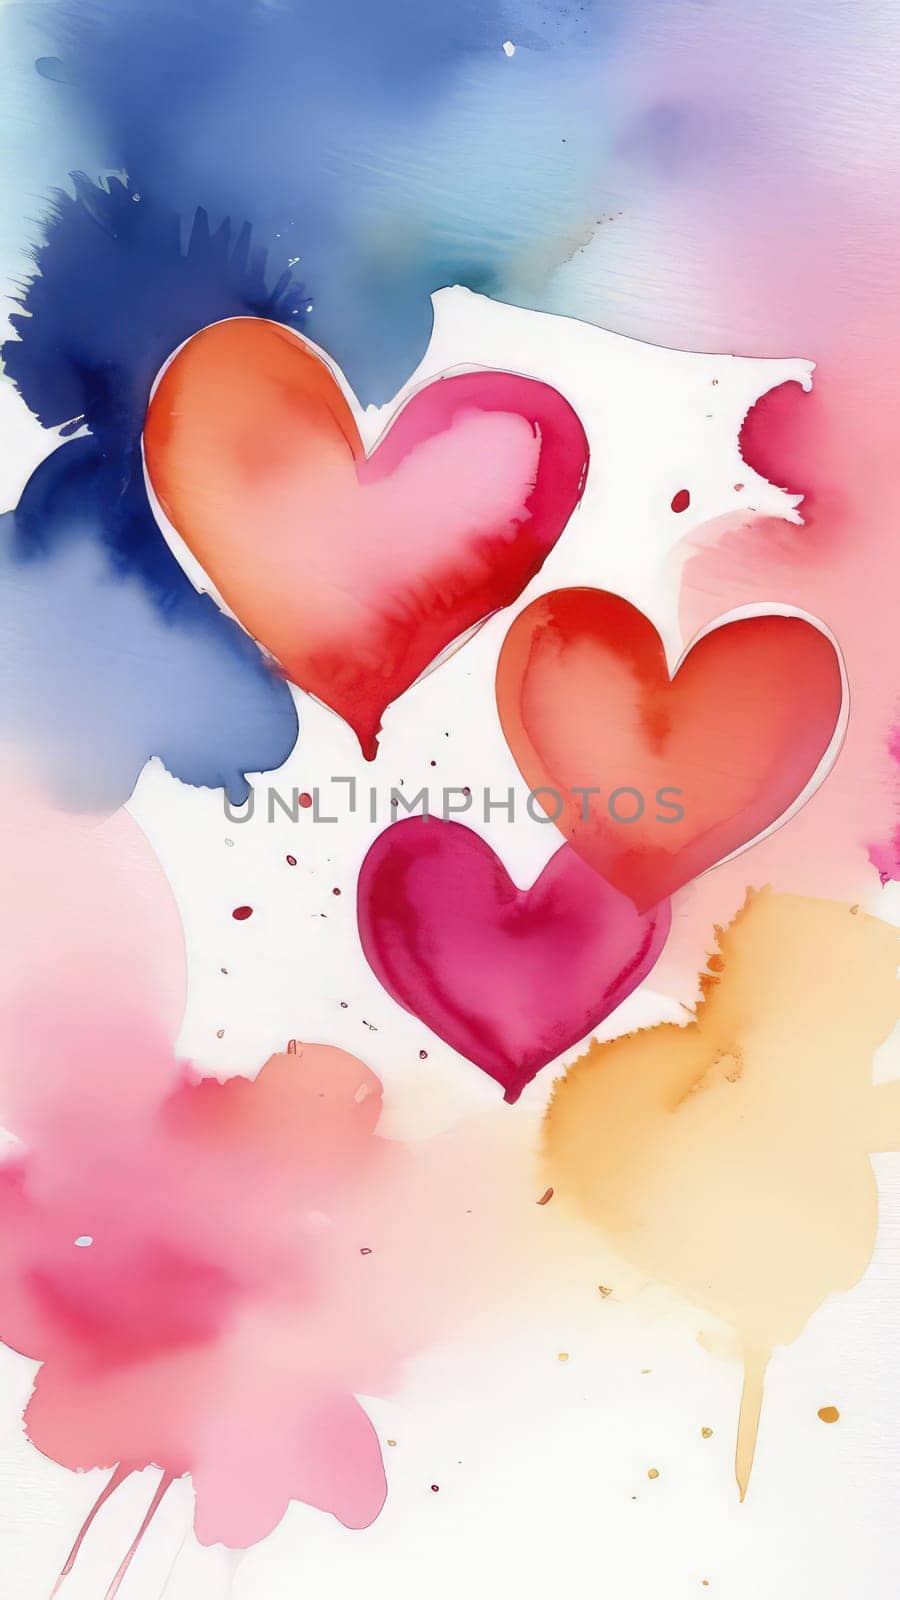 Valentines day watercolor abstract different hearts pastel background vertical banner. Perfect for Valentines Day card, romantic themed design, voucher, greeting card, wrapping paper. Copy space